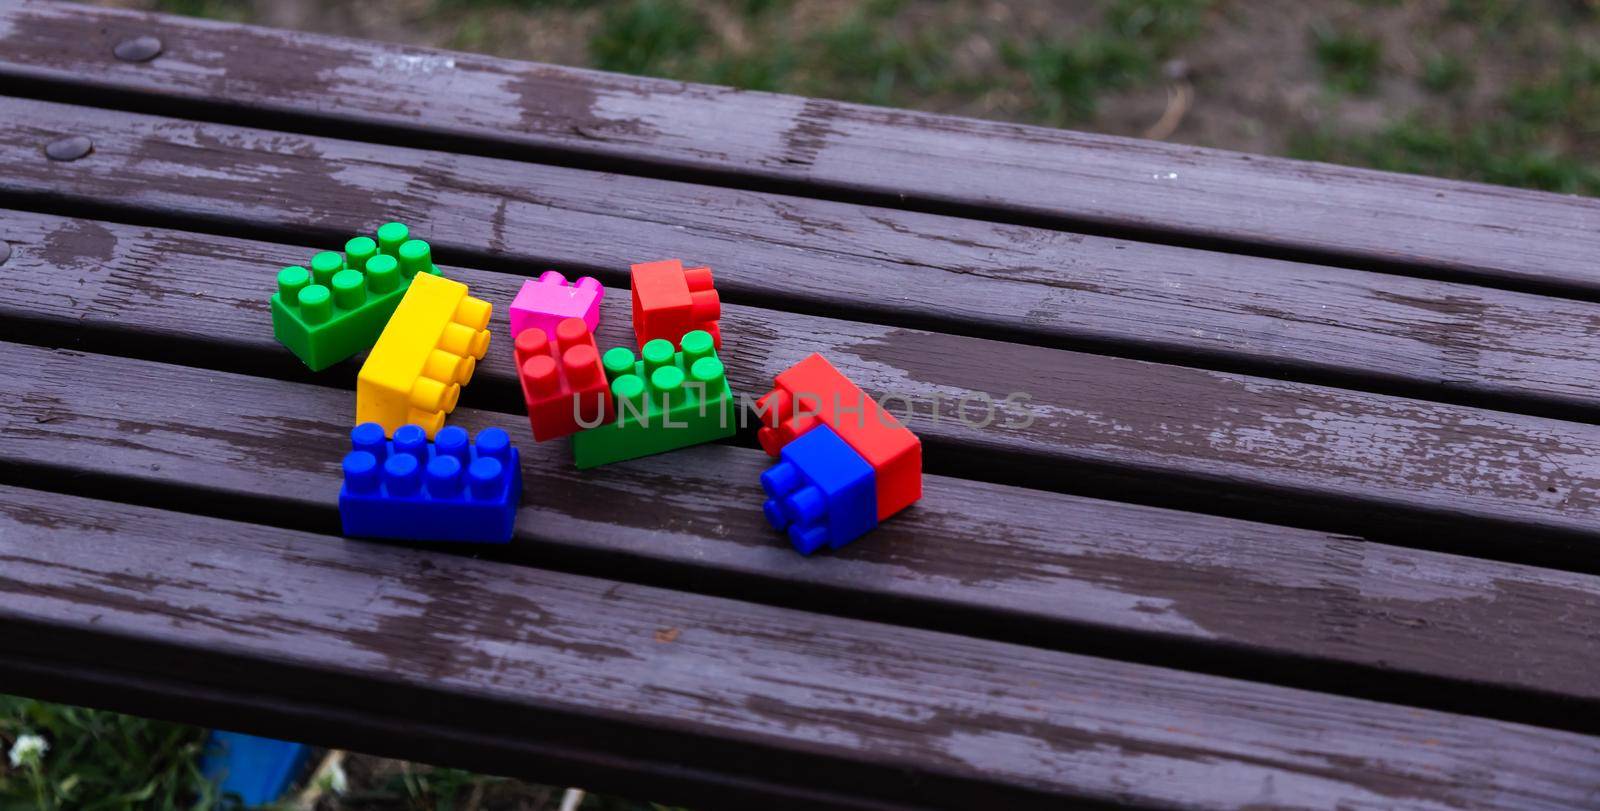 Colorful toy building blocks or bricks On wood background